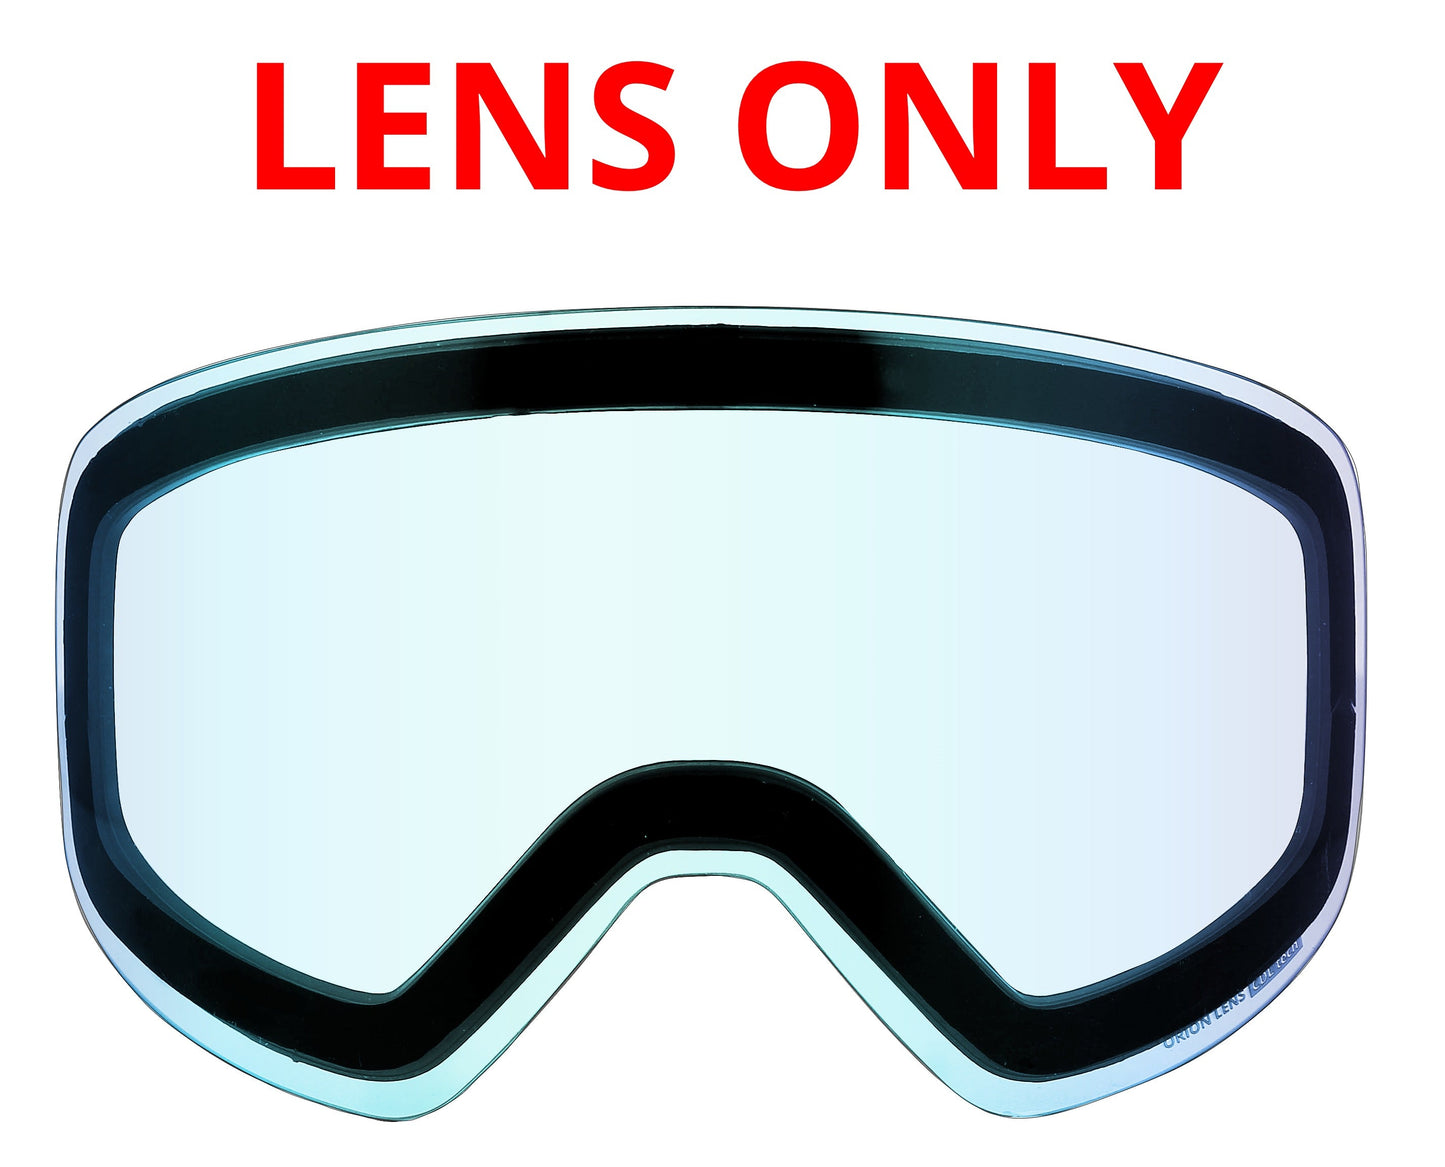 LENS ONLY - 6fiftyfive frameless ski goggles for men and women - LENS ONLY - FLASH YELLOW - 6fiftyfive